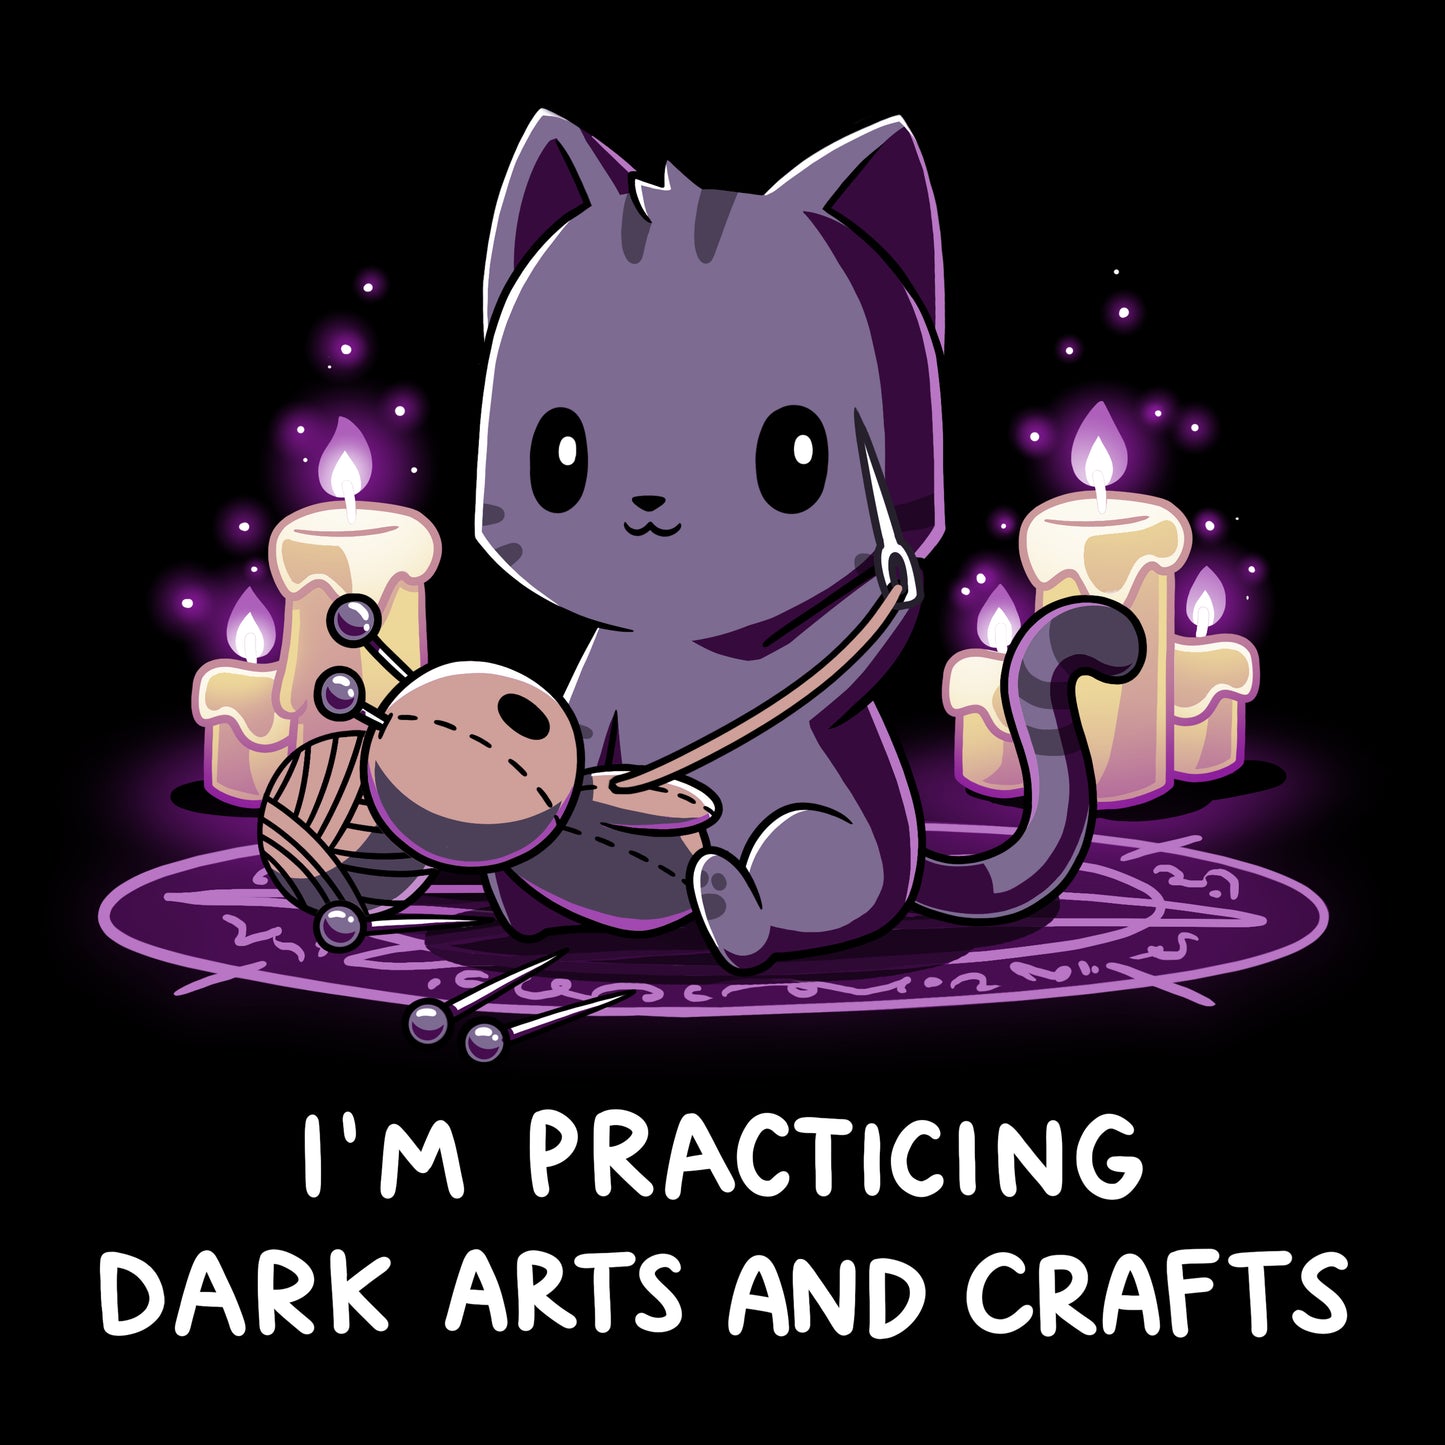 I'm practicing Dark Arts and Crafts by TeeTurtle.